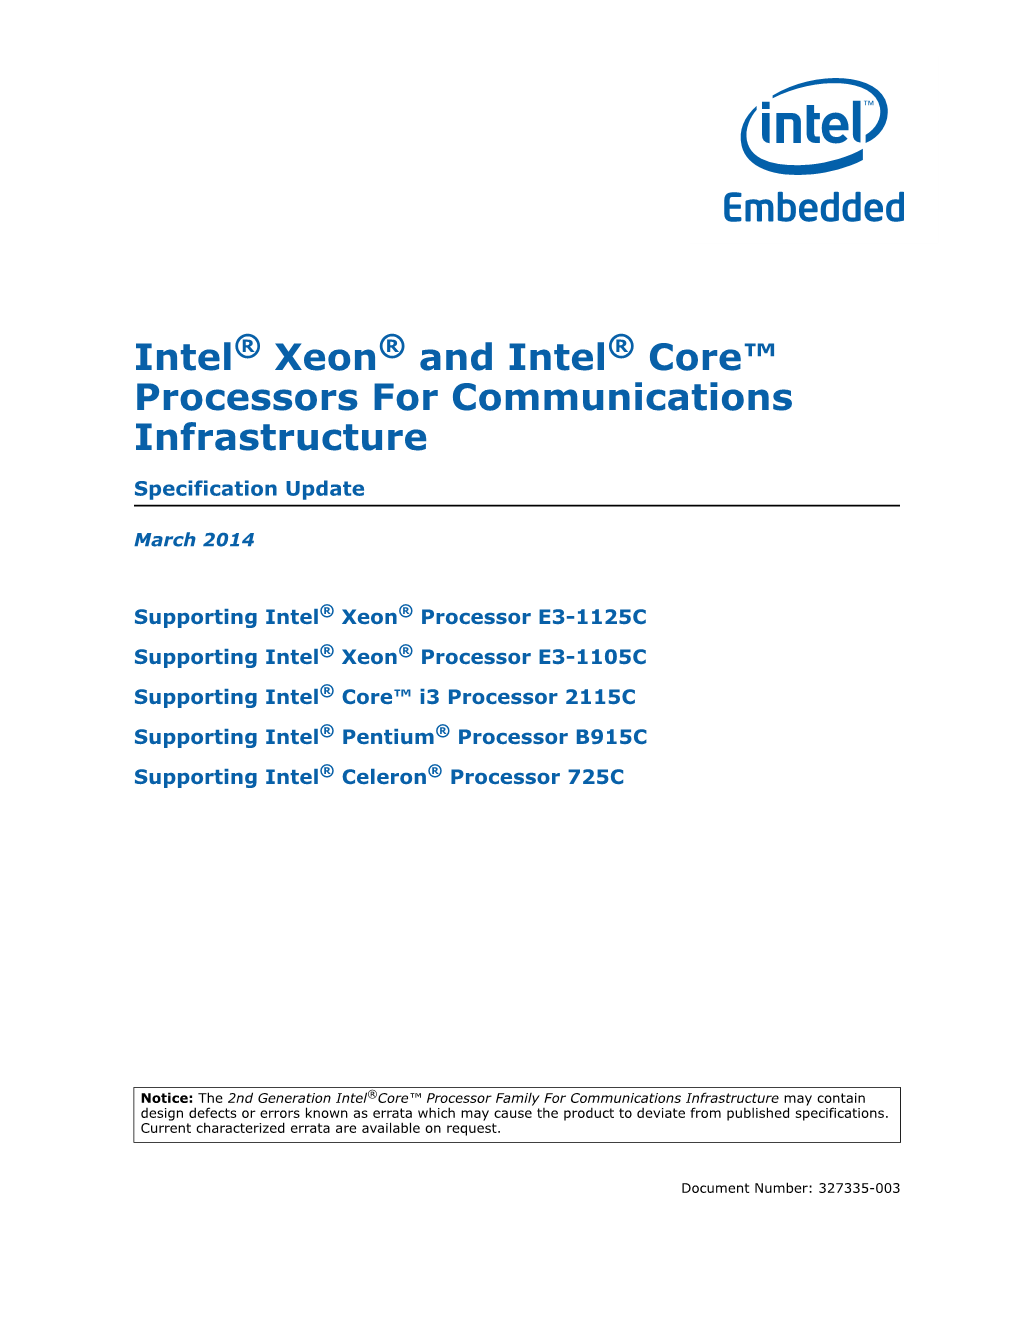 Intel® Xeon® and Intel® Core™ Processors for Commnications